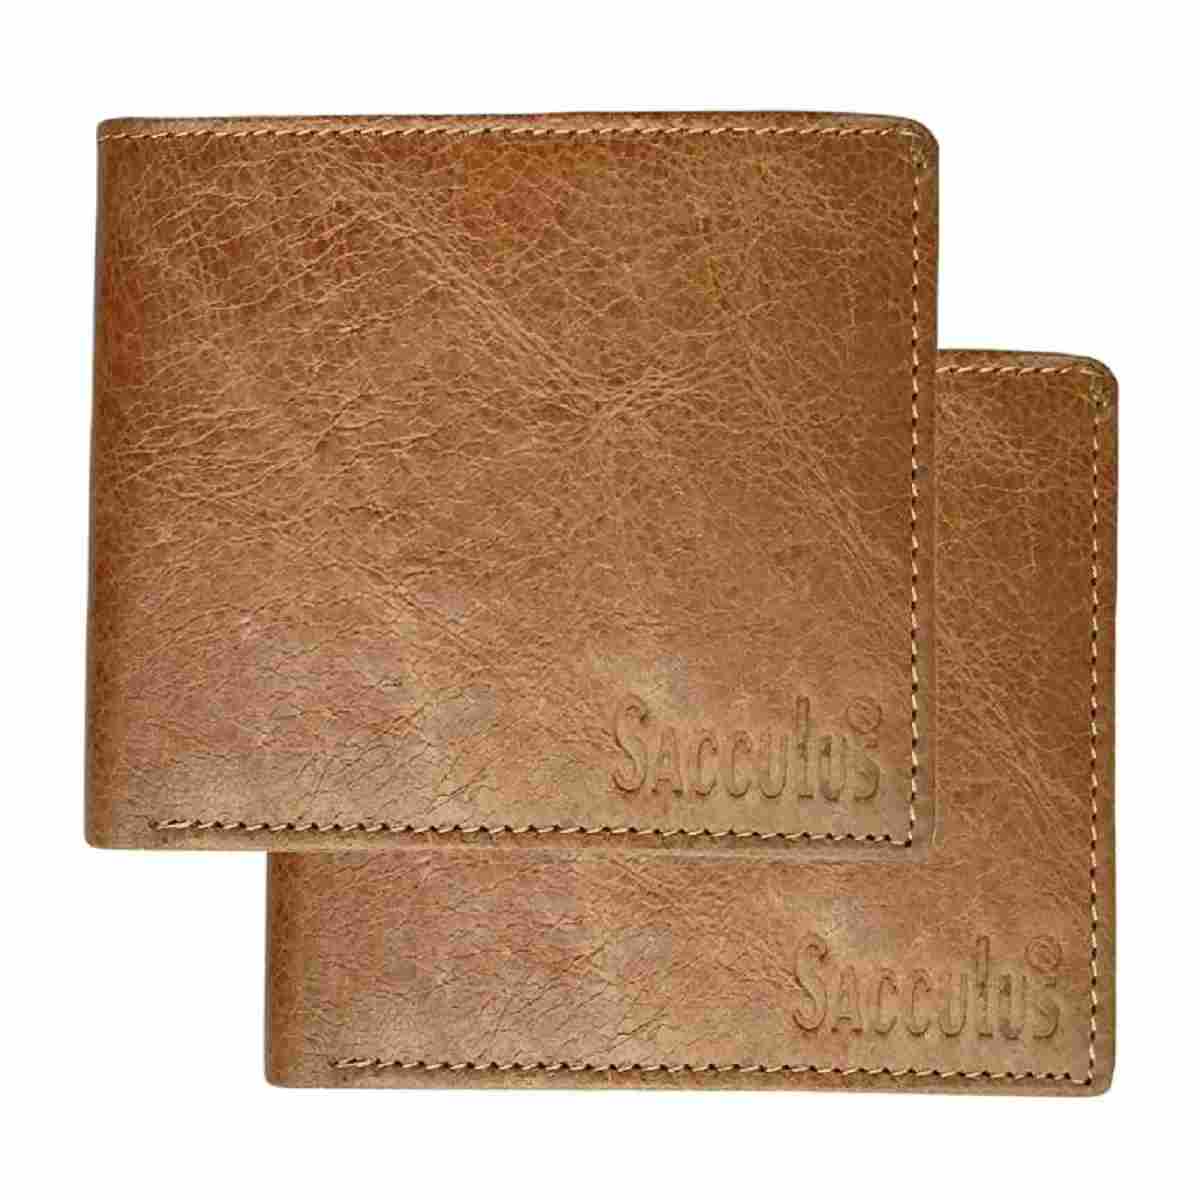 E2012 B Crust Leather Wallets for men pack of 2